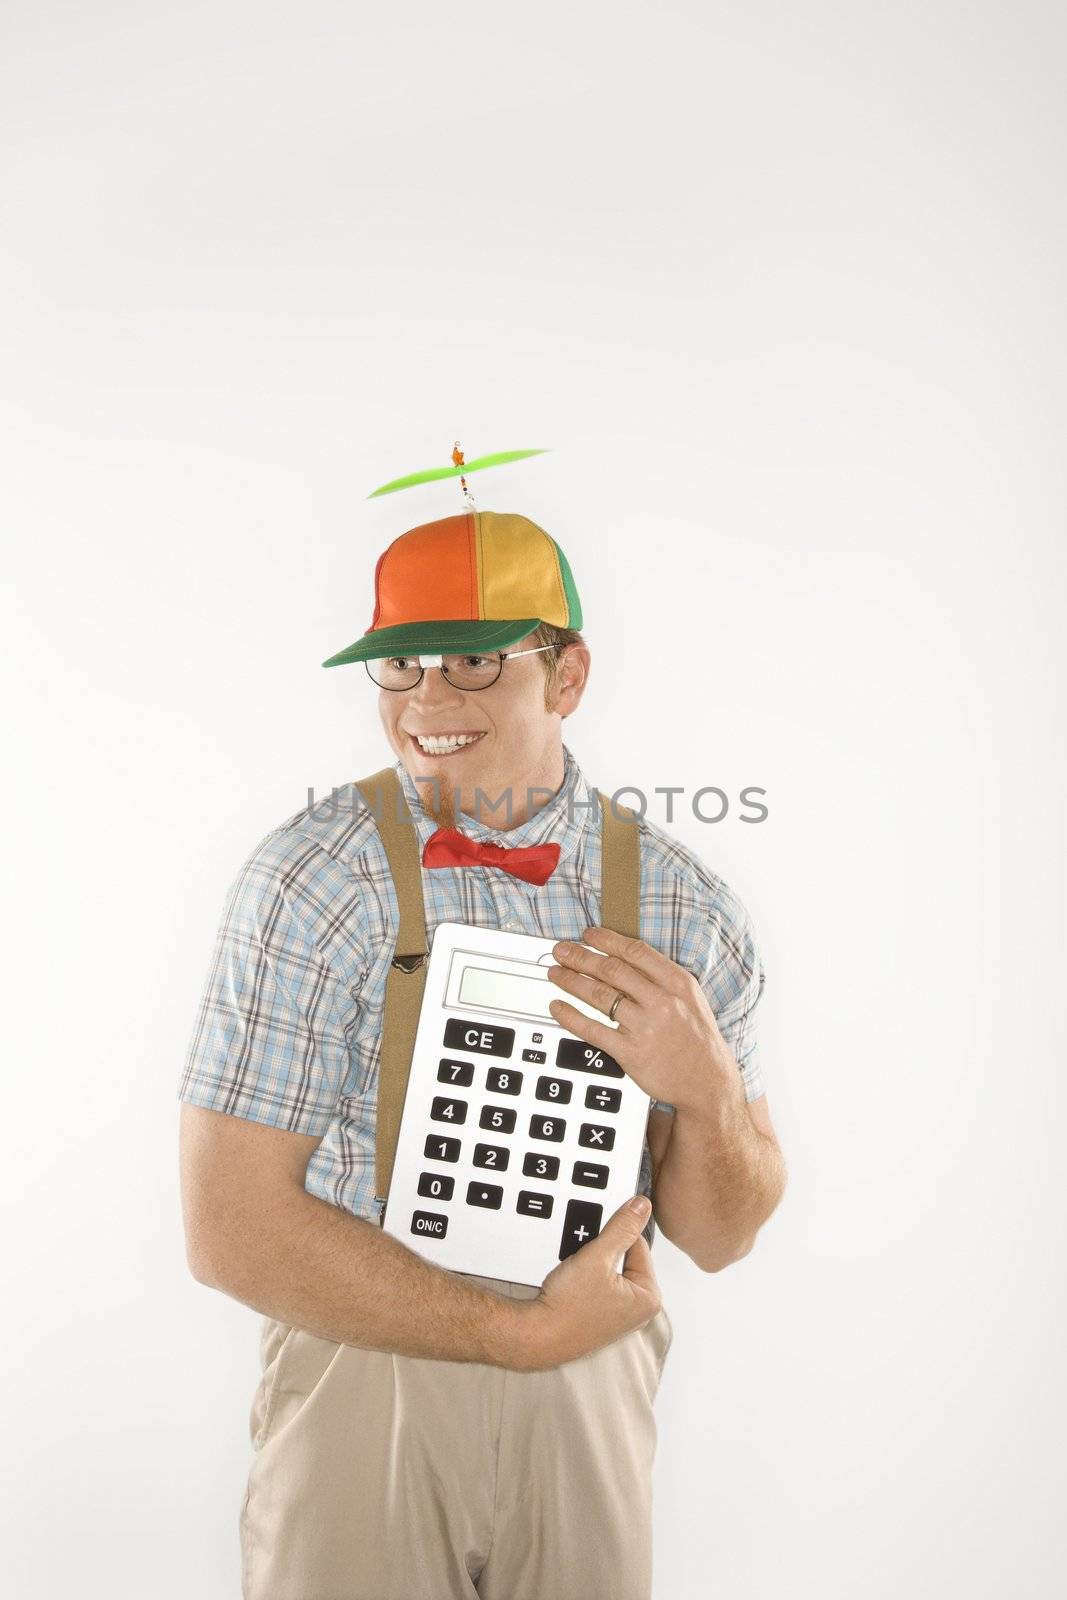 Caucasian young man dressed like nerd wearing beanie and smiling while holding large calculator.